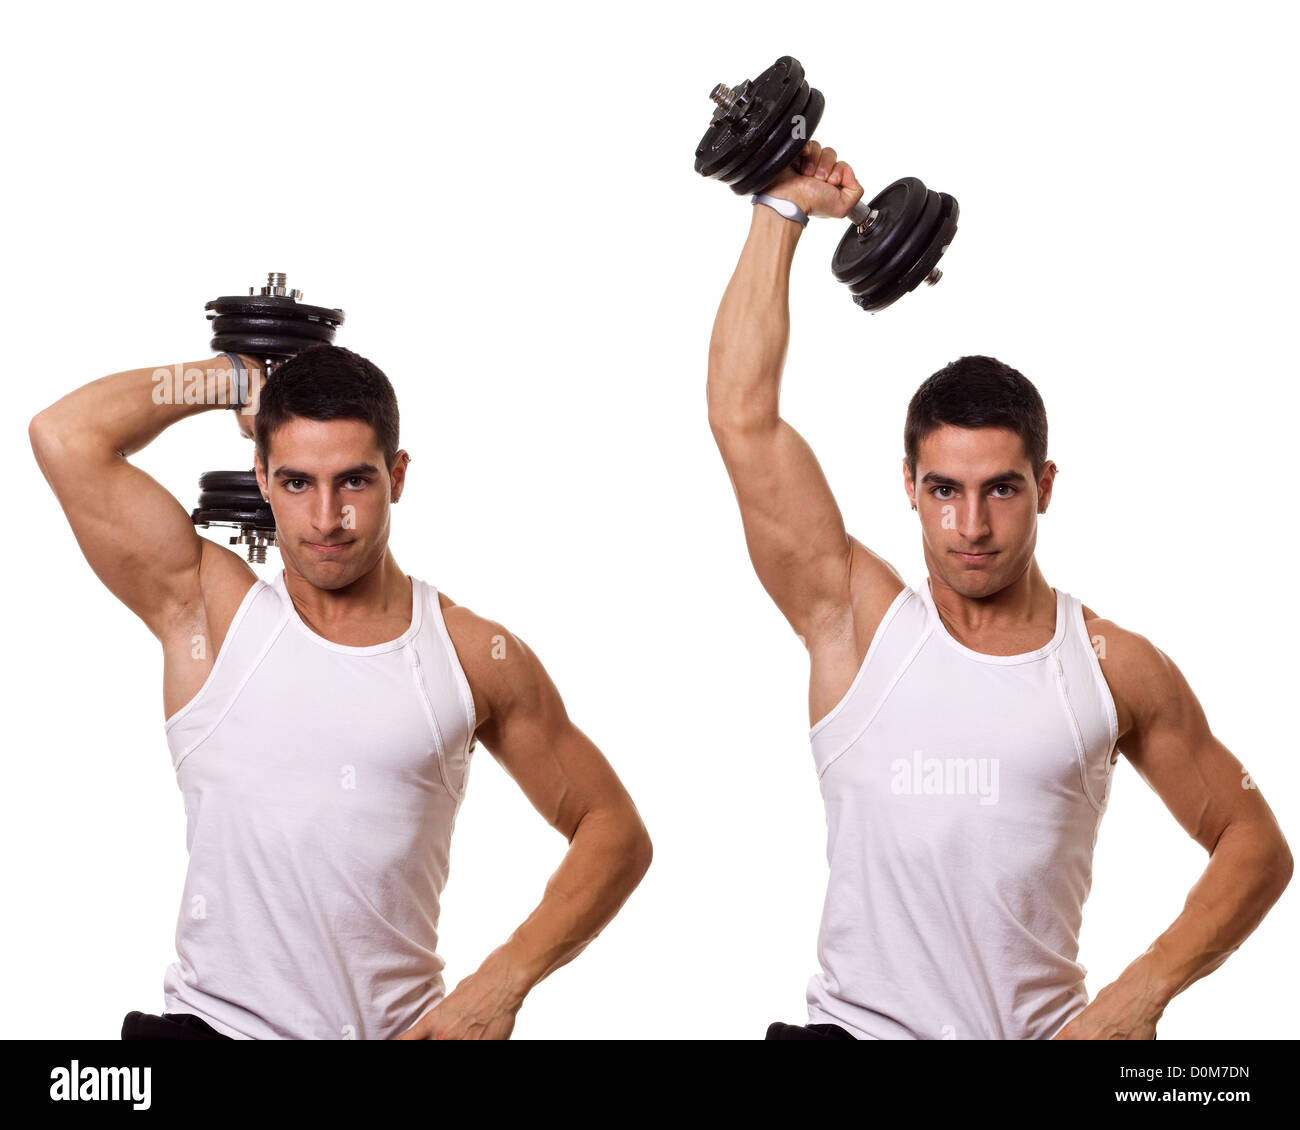 Dumbbell Extension High Resolution Stock Photography and Images - Alamy